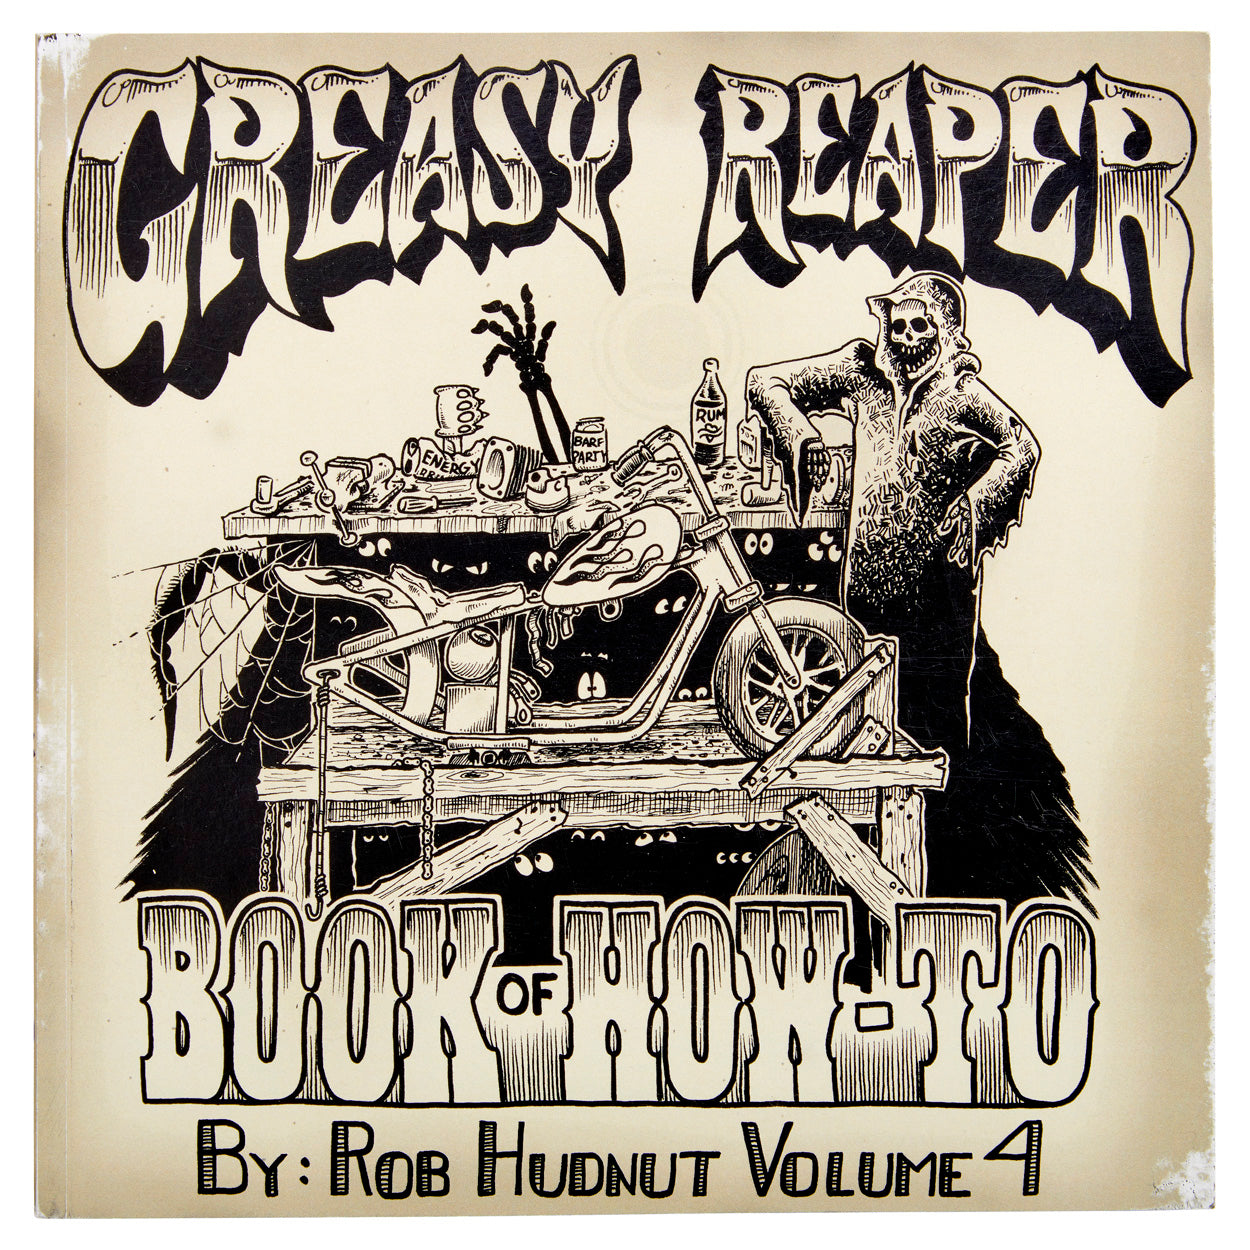 Greasy Reaper Book of How-To - Volume 4